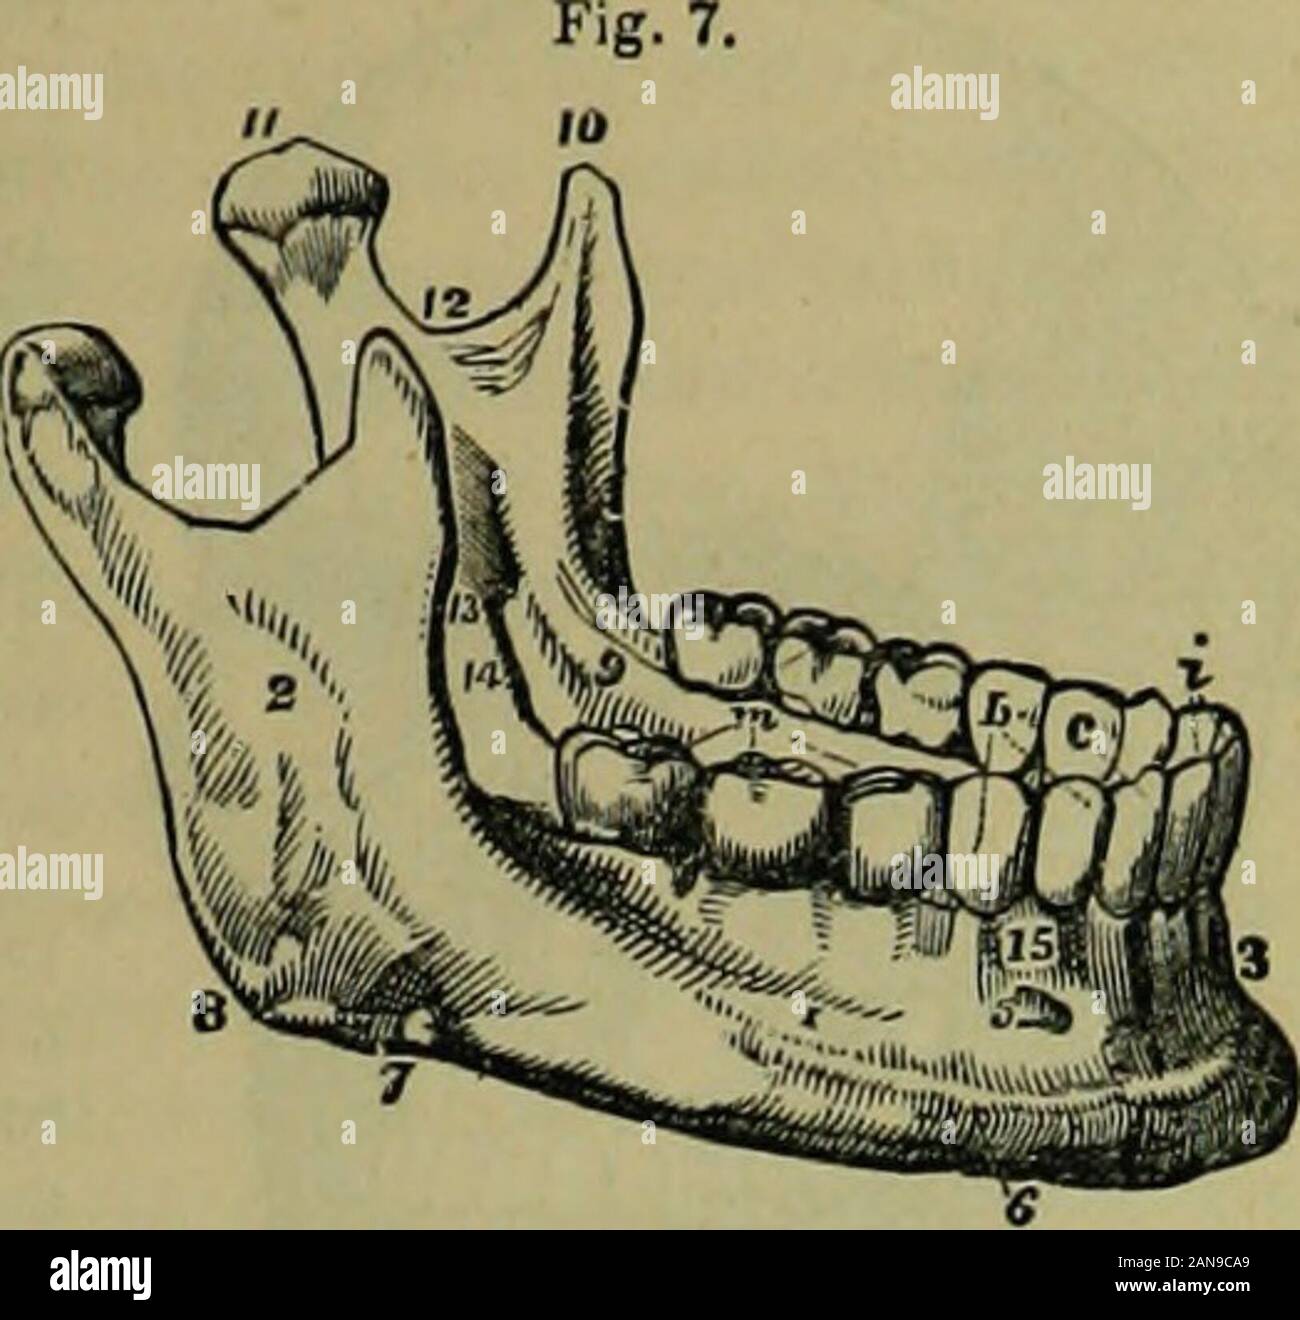 The hydropathic encyclopedia: a system of hydropathy and hygiene .. . ht, spongy, irregularly curvedbones, projecting inward toward the septum narium, or partition of thenose. Each one is attached to the maxillary bone in front, and thepalate bone behind. The Vomer is a thin quadrilateril piece, forming the back and lowoipart of the septum of the nose OS TED LOT, Y. 61 The Inferior Mc ciliary bone, or lov er jaw, is an arch of bone contain-ing the unrW iow of teeth. Itsdistinctive parts are shown in fig. 7. 1. The body. 2. The ramus. 3 TheSymphisis, or point of union. 4. Fossator the depressi Stock Photo